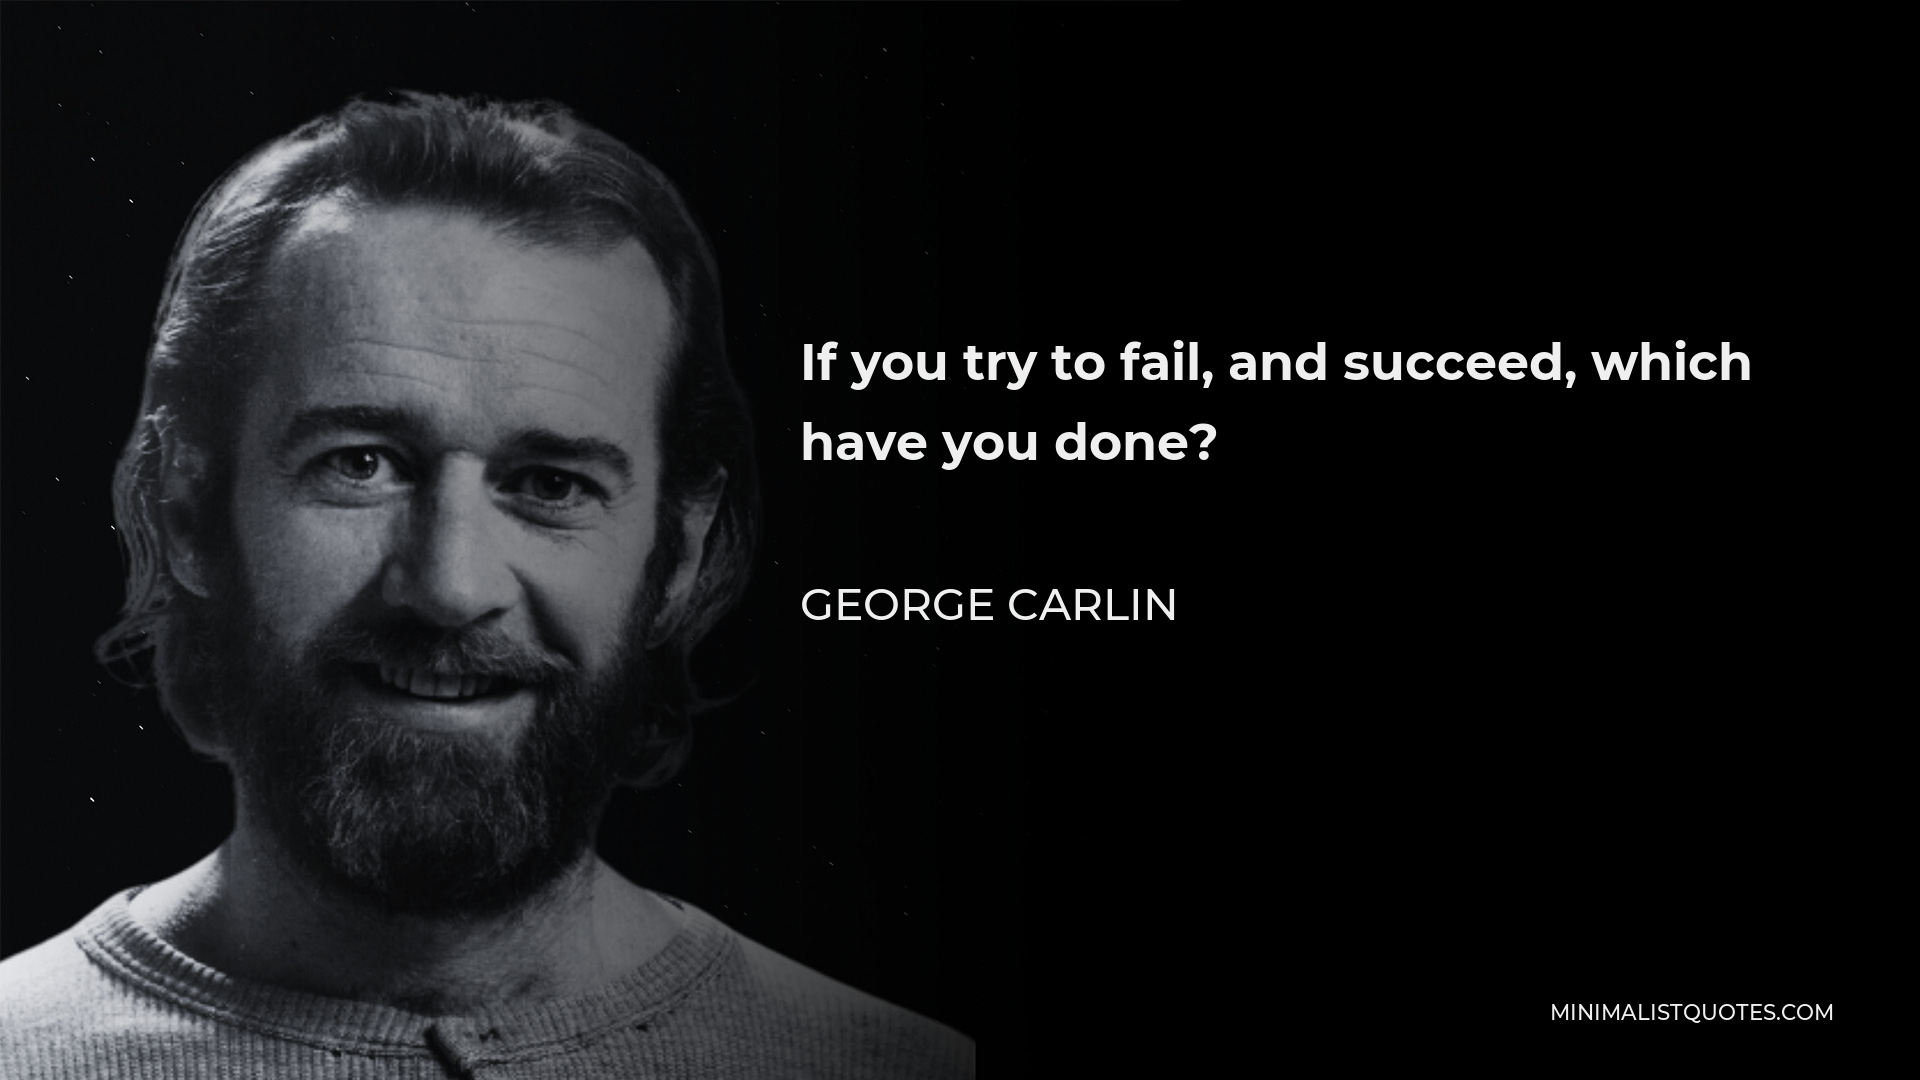 George Carlin Quote - If you try to fail, and succeed, which have you done?